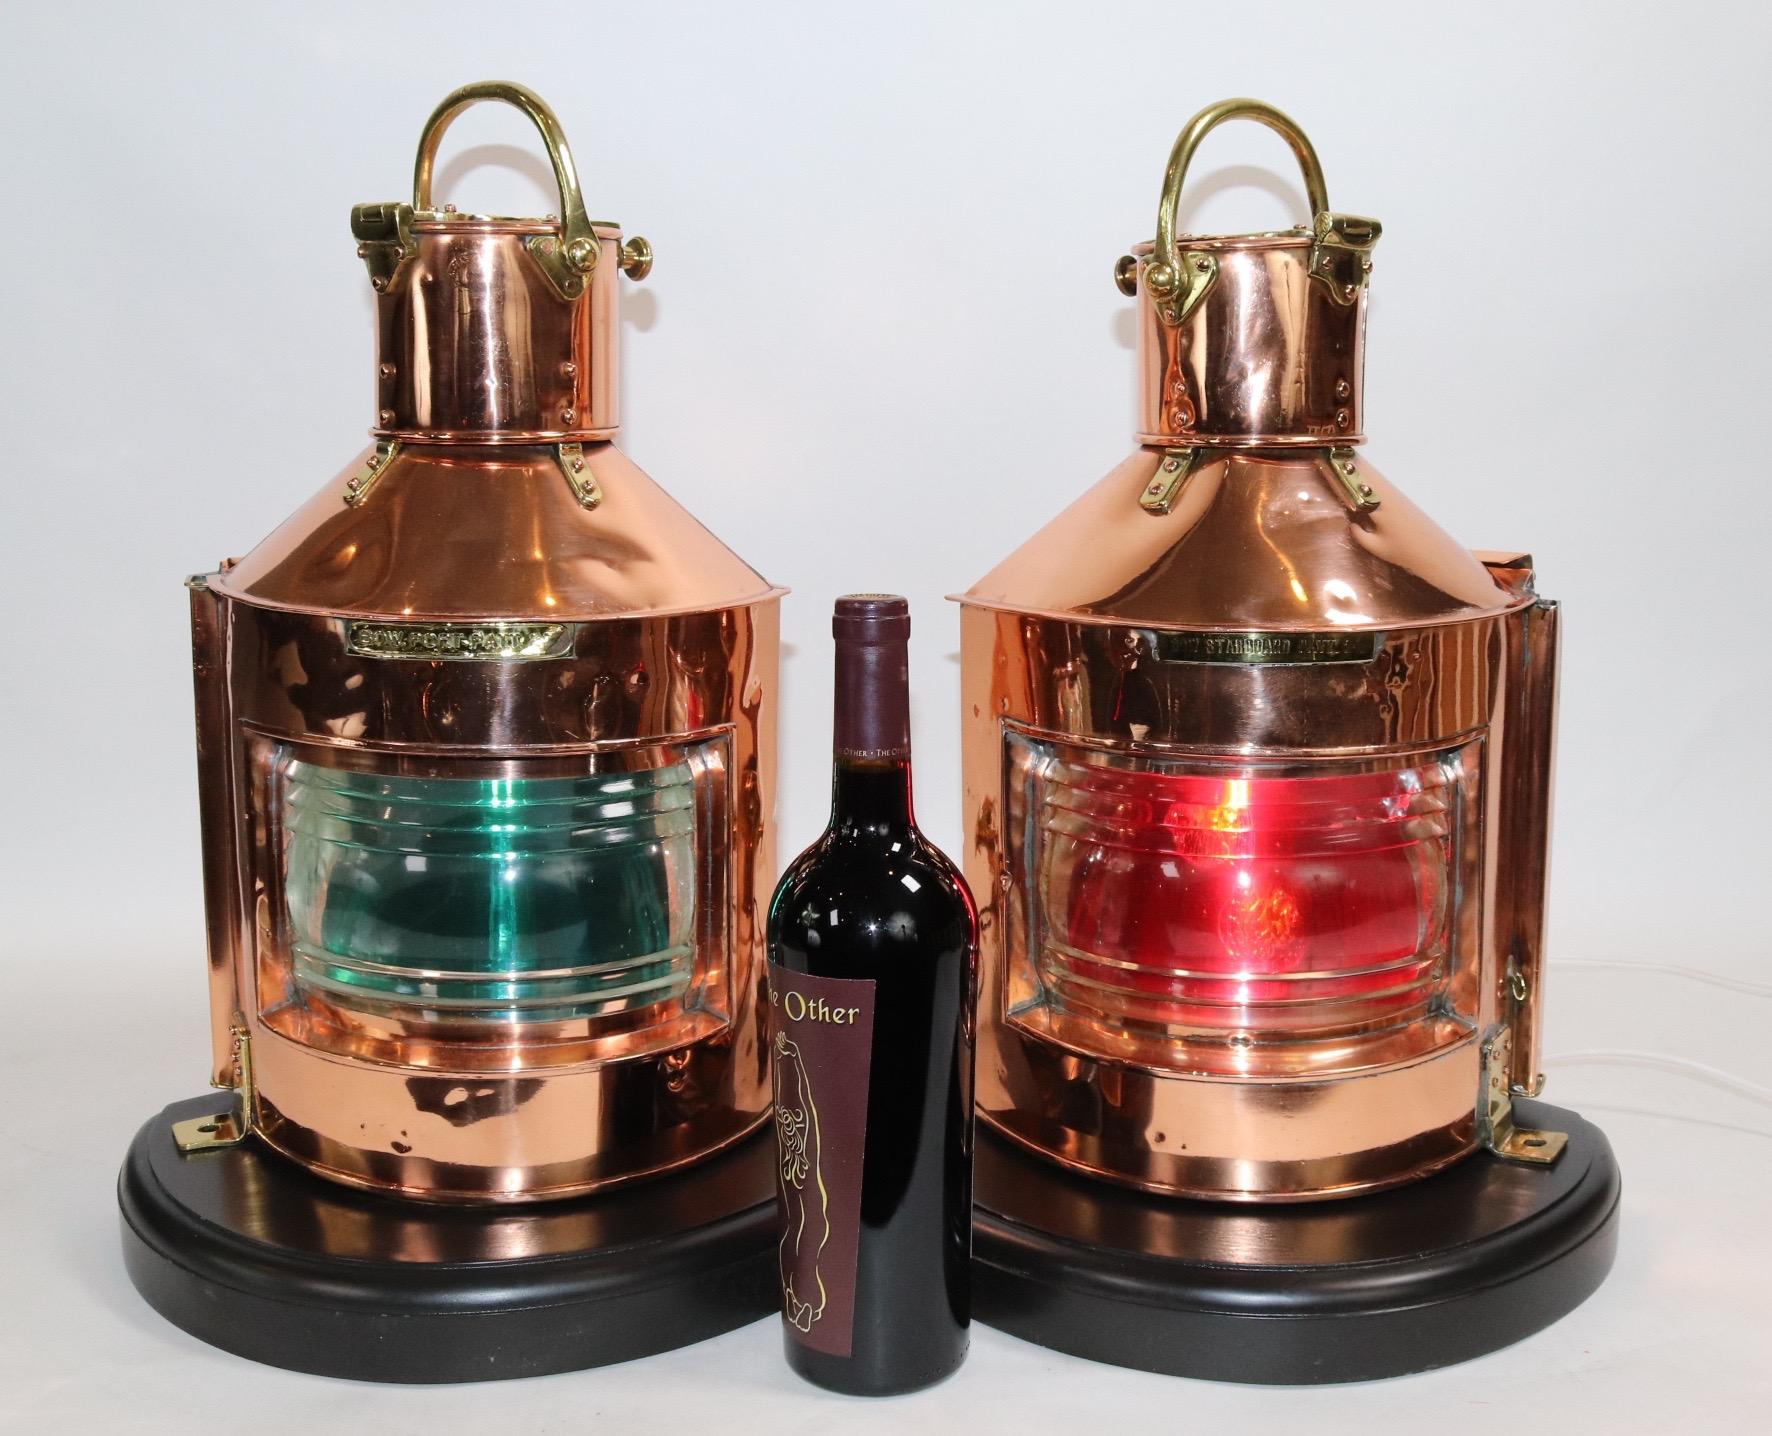 Highly polished copper and brass ships lanterns by Anderson and Gyde of England. With clear glass fresnel lenses, removable red and green filters, brass bezels and hinges, mounted to thick wood bases with dark finish. Both lanterns have been